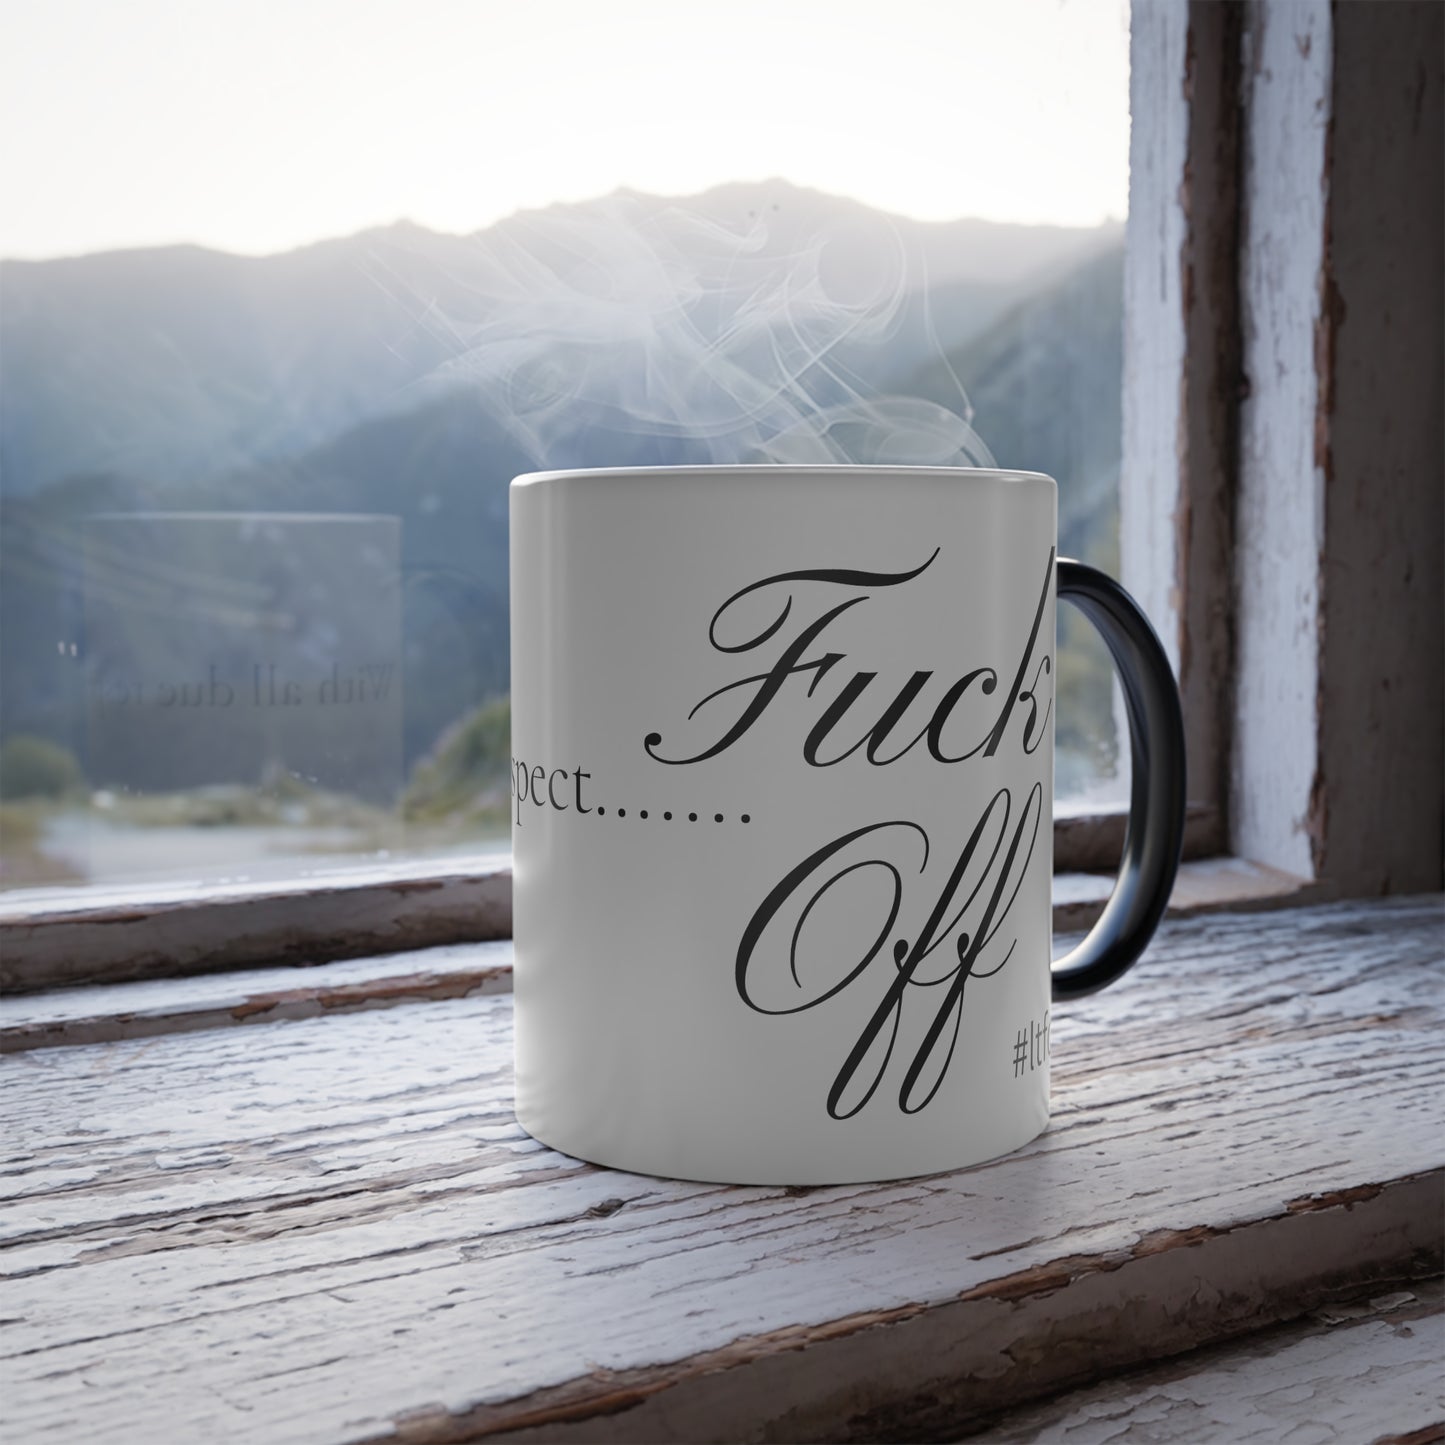 "with all due respect...Fuck off" Color Morphing Mug, 11oz #ltfc